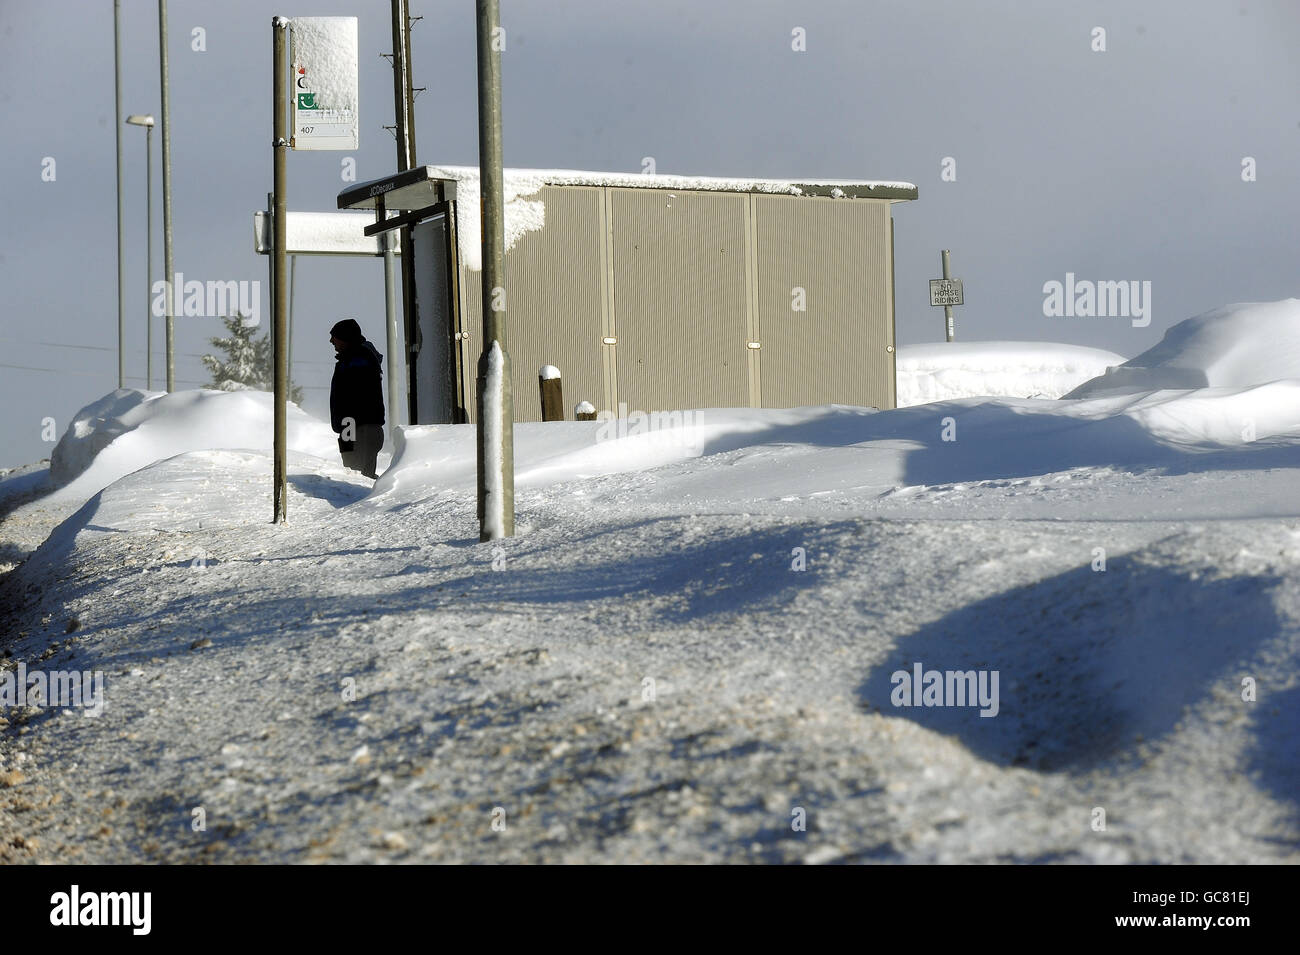 Snow drifts up to ten feet high at a bus stop in Denshaw near Oldham, as heavy snowfall continues across most parts of the UK. Stock Photo